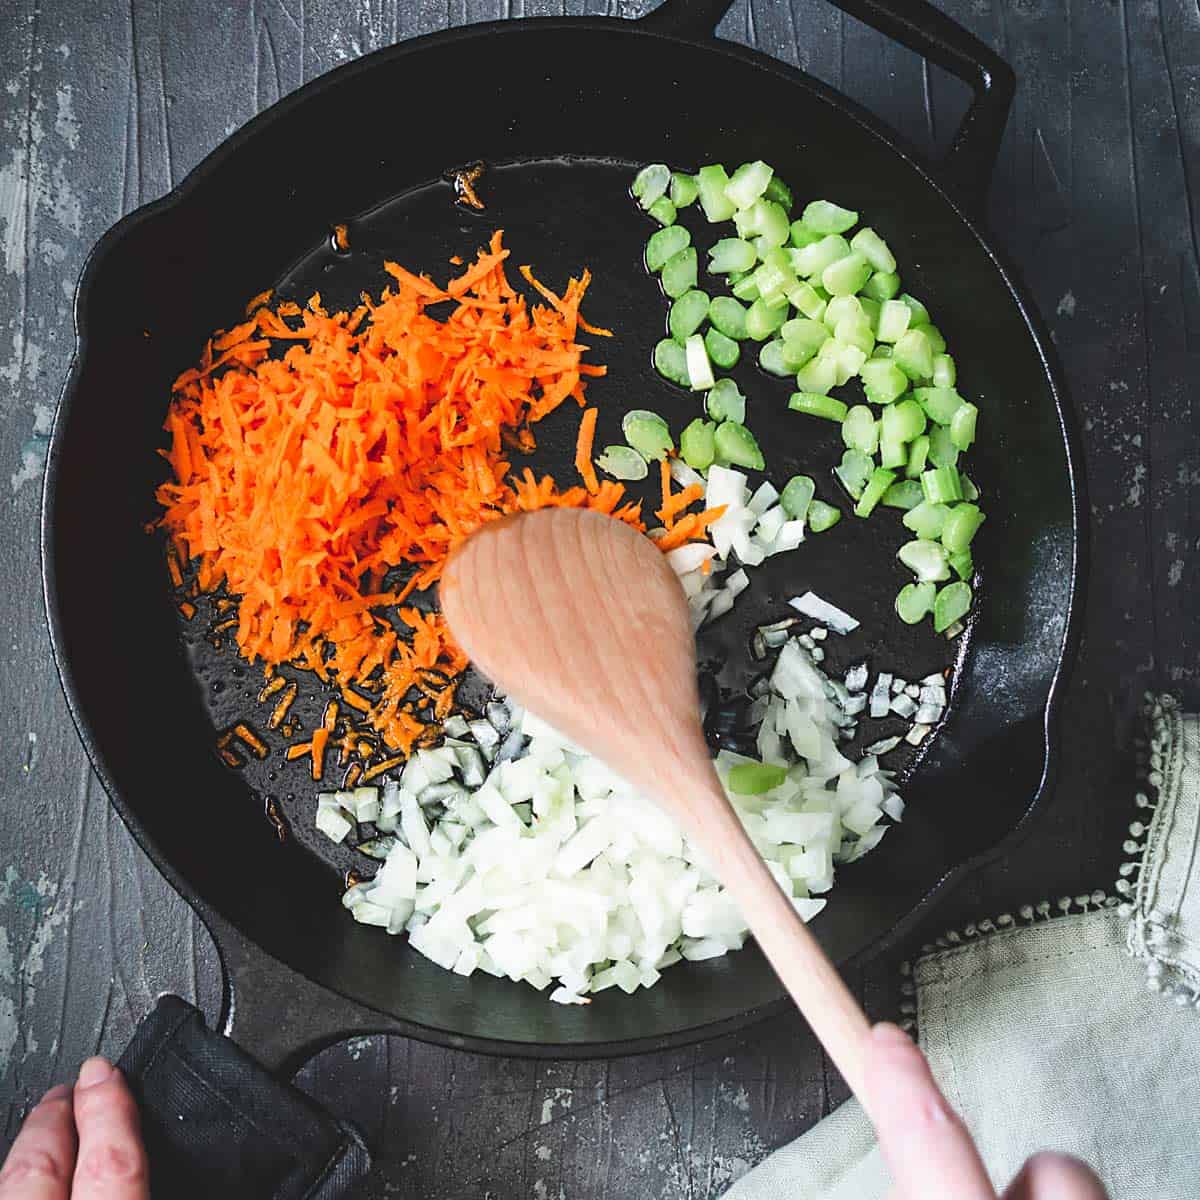 Cooking vegetables in a cast-iron skillet.